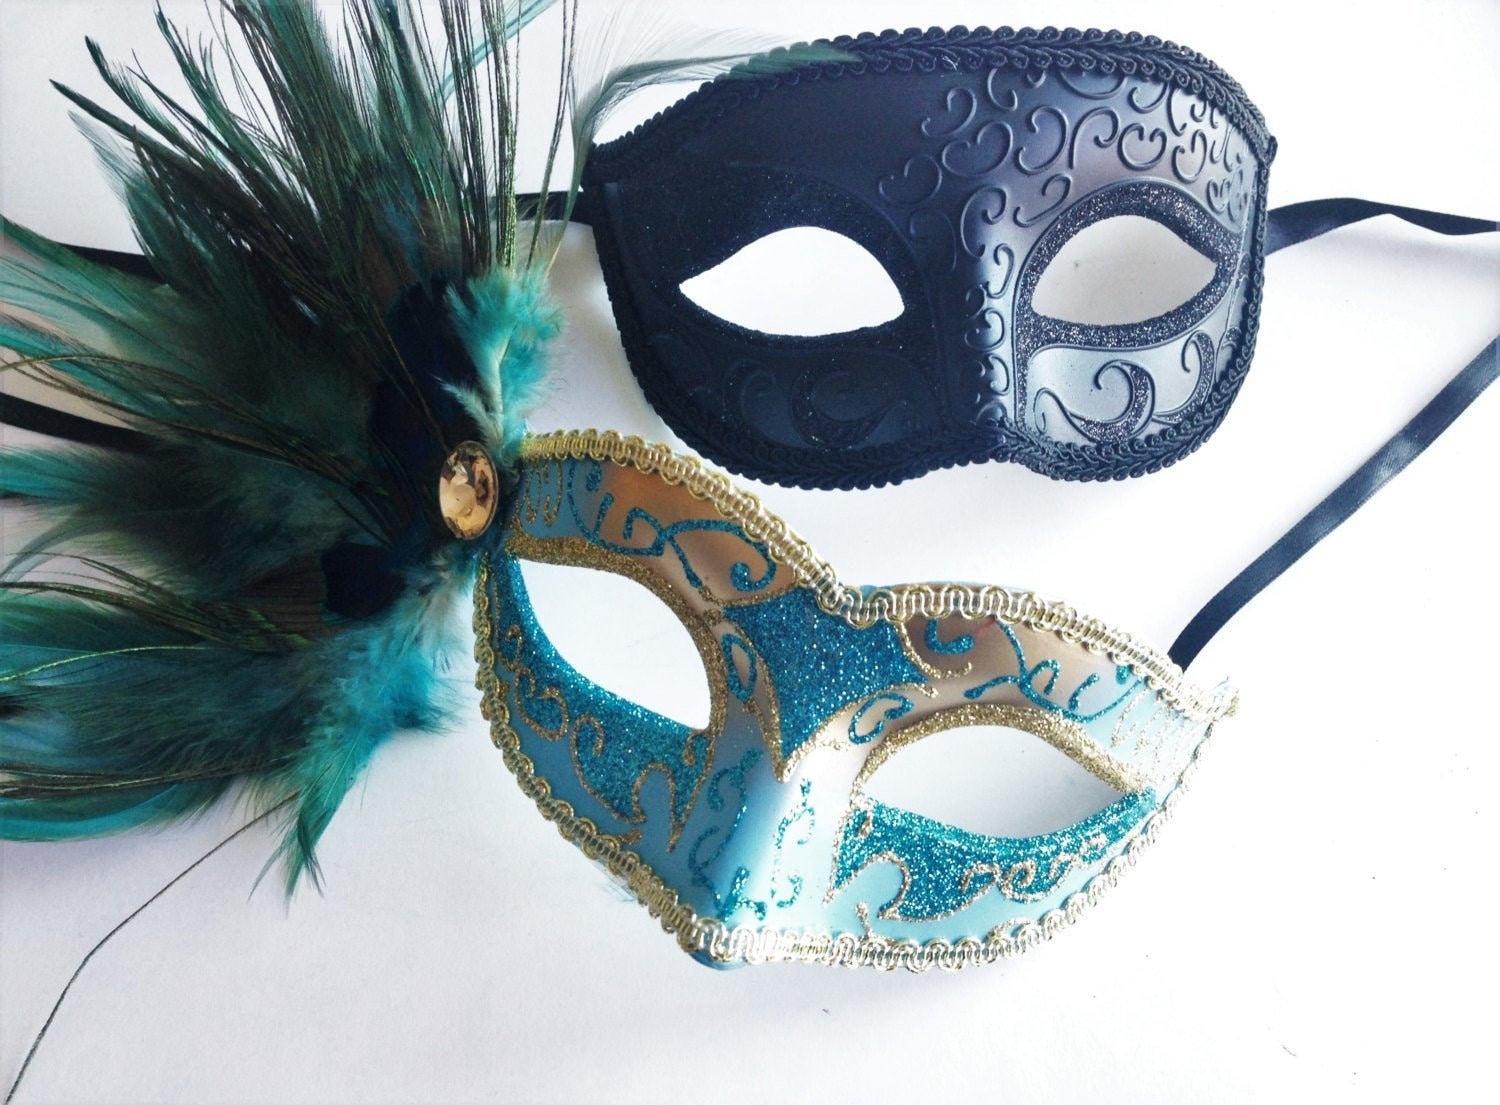 Turquoise Blue and Black Bird Feather Mask Fancy Dress Party Masquerade Ball